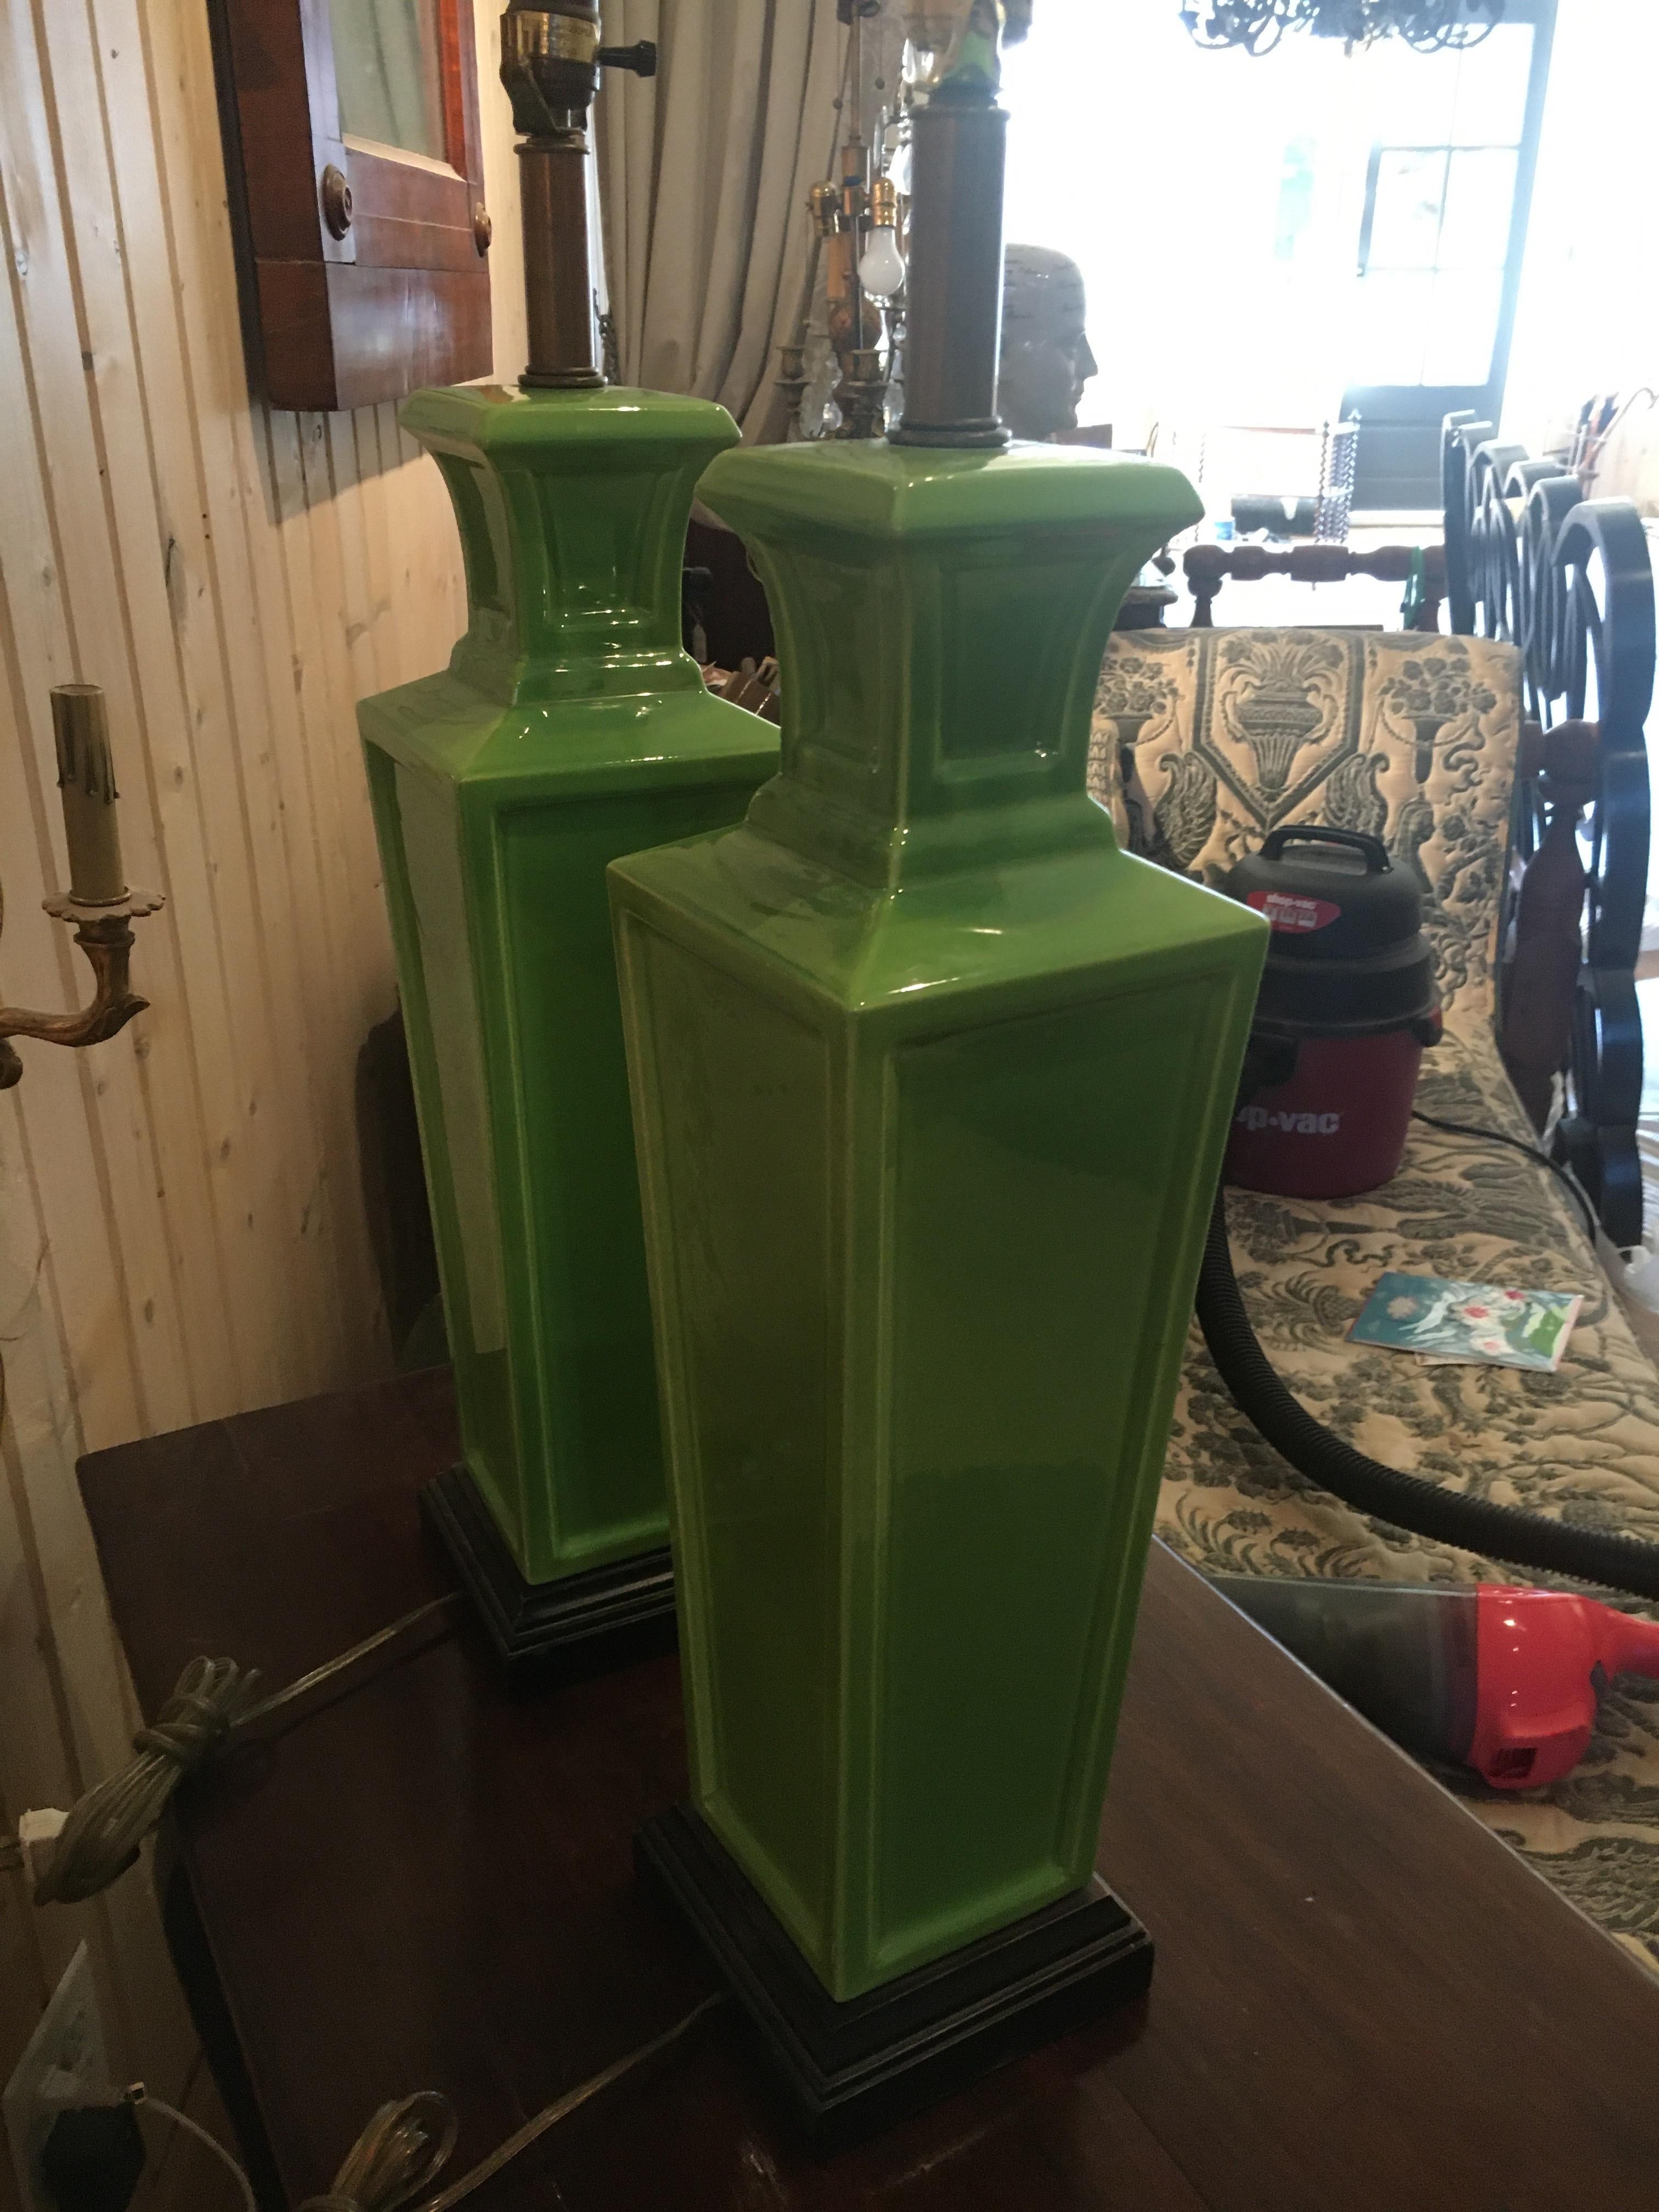 Two Pairs of Frederick Cooper Hollywood Regency Table Lamps, Great Apple Green In Excellent Condition For Sale In Buchanan, MI